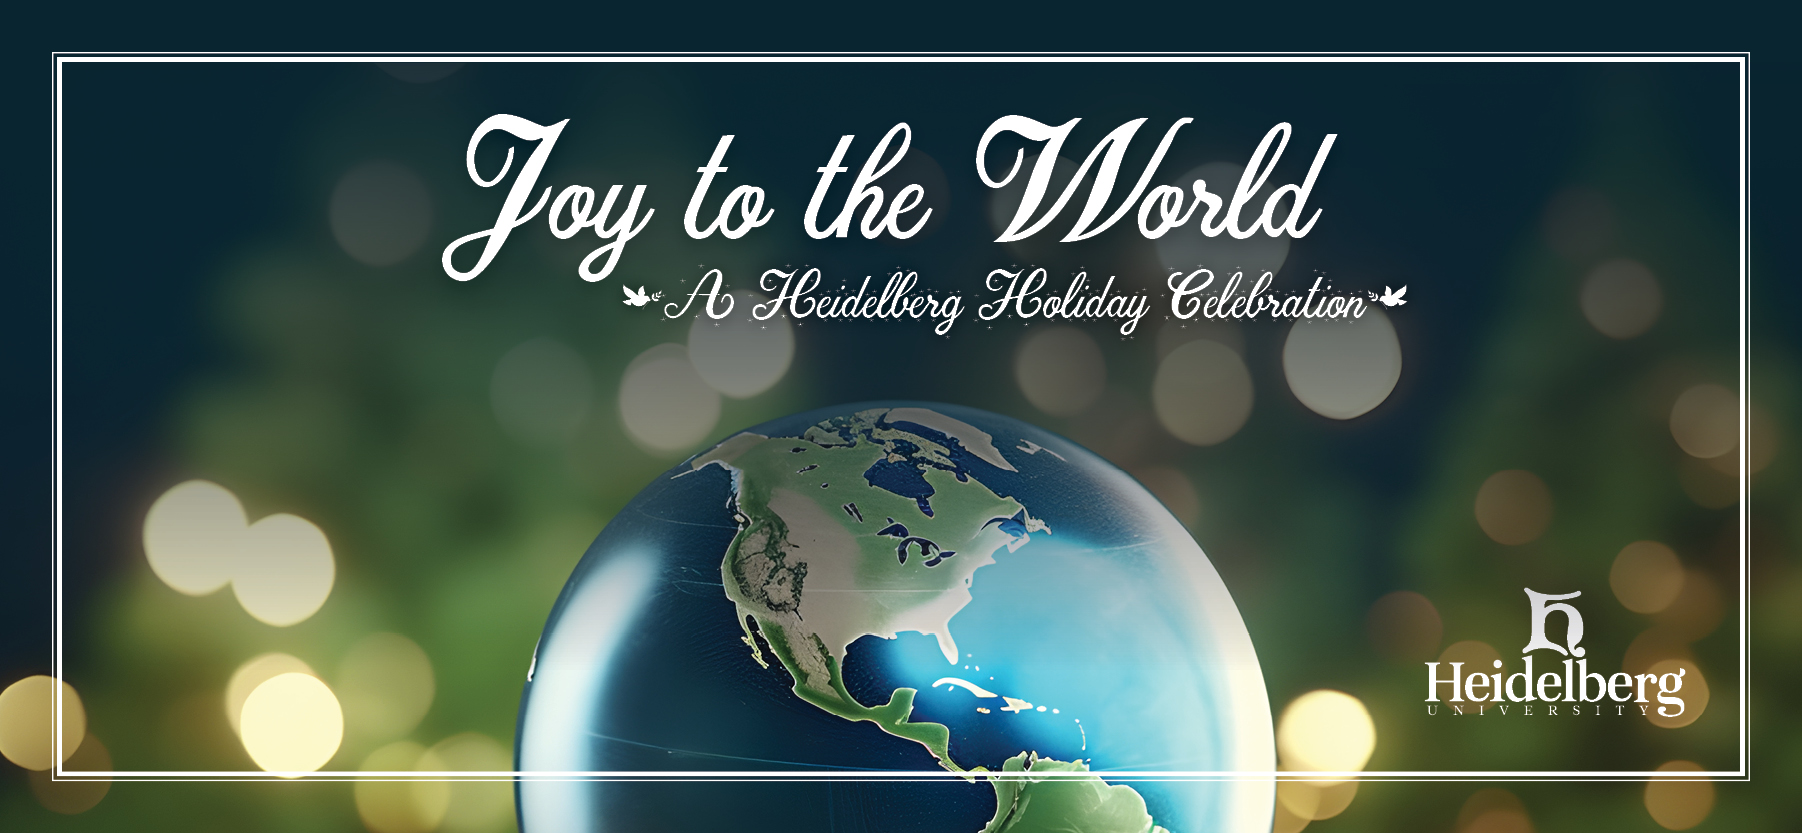 Joy to the World Concert